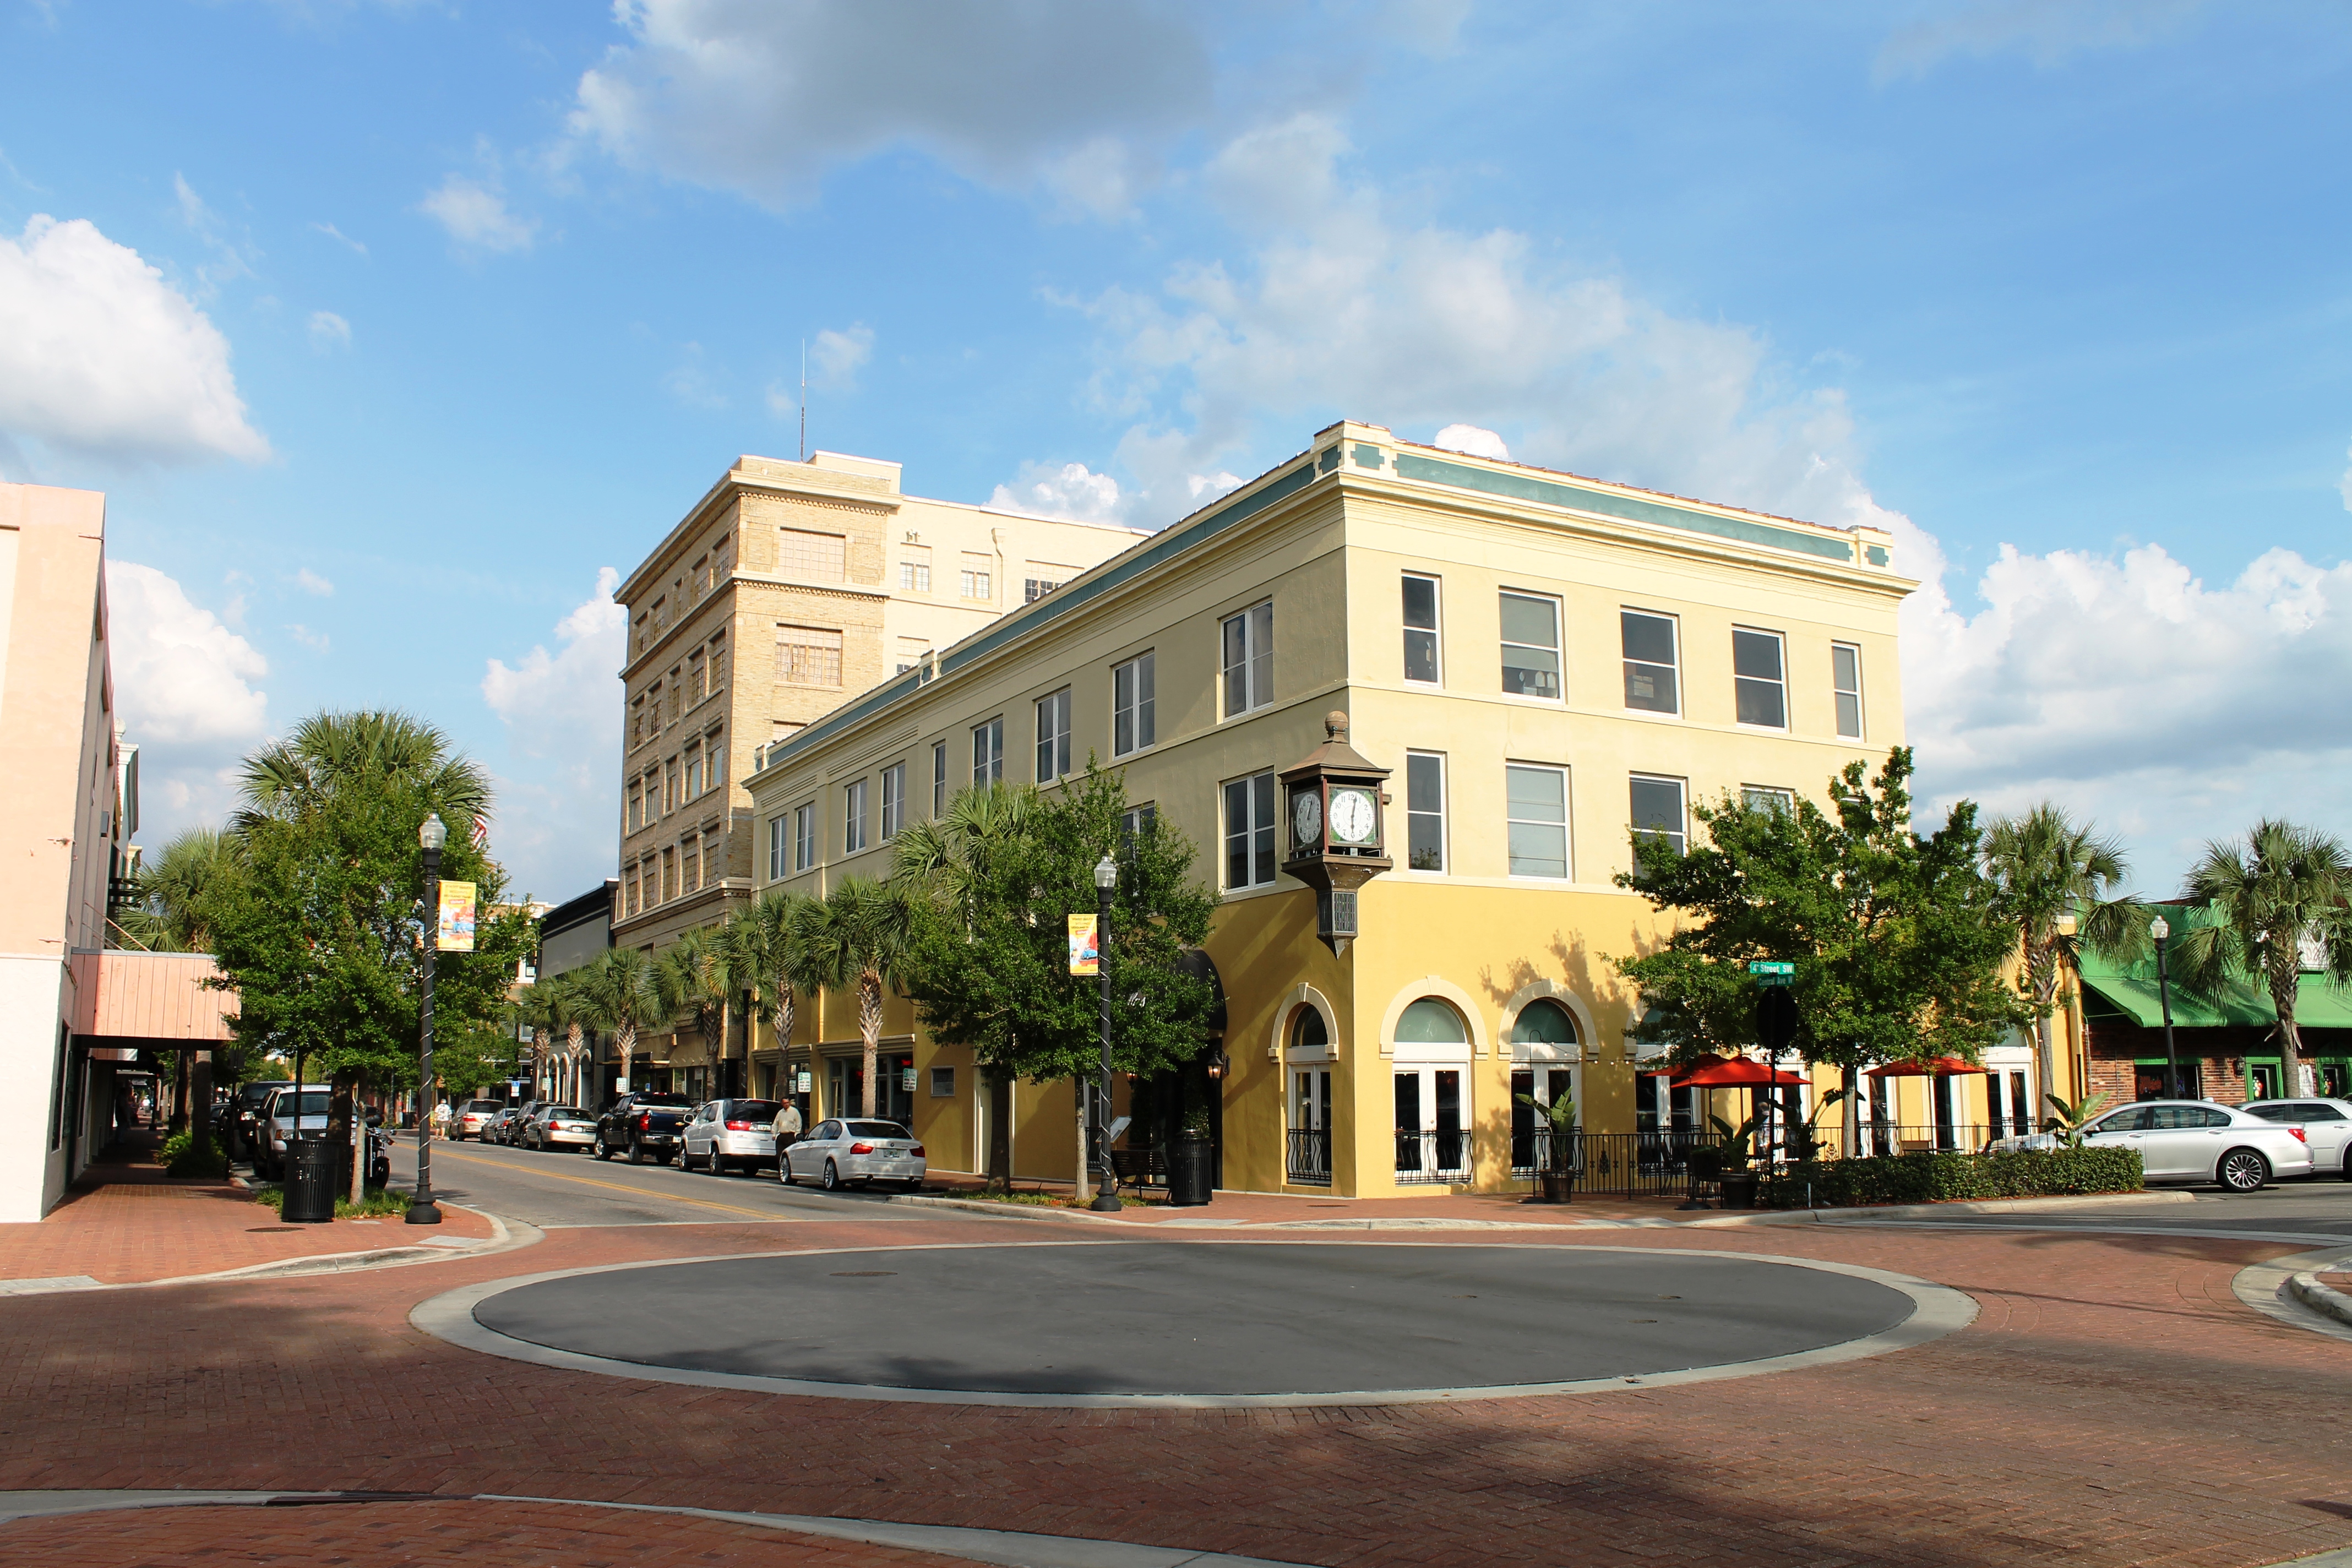 File:Downtown Winter Haven, Florida.jpg - Wikimedia Commons